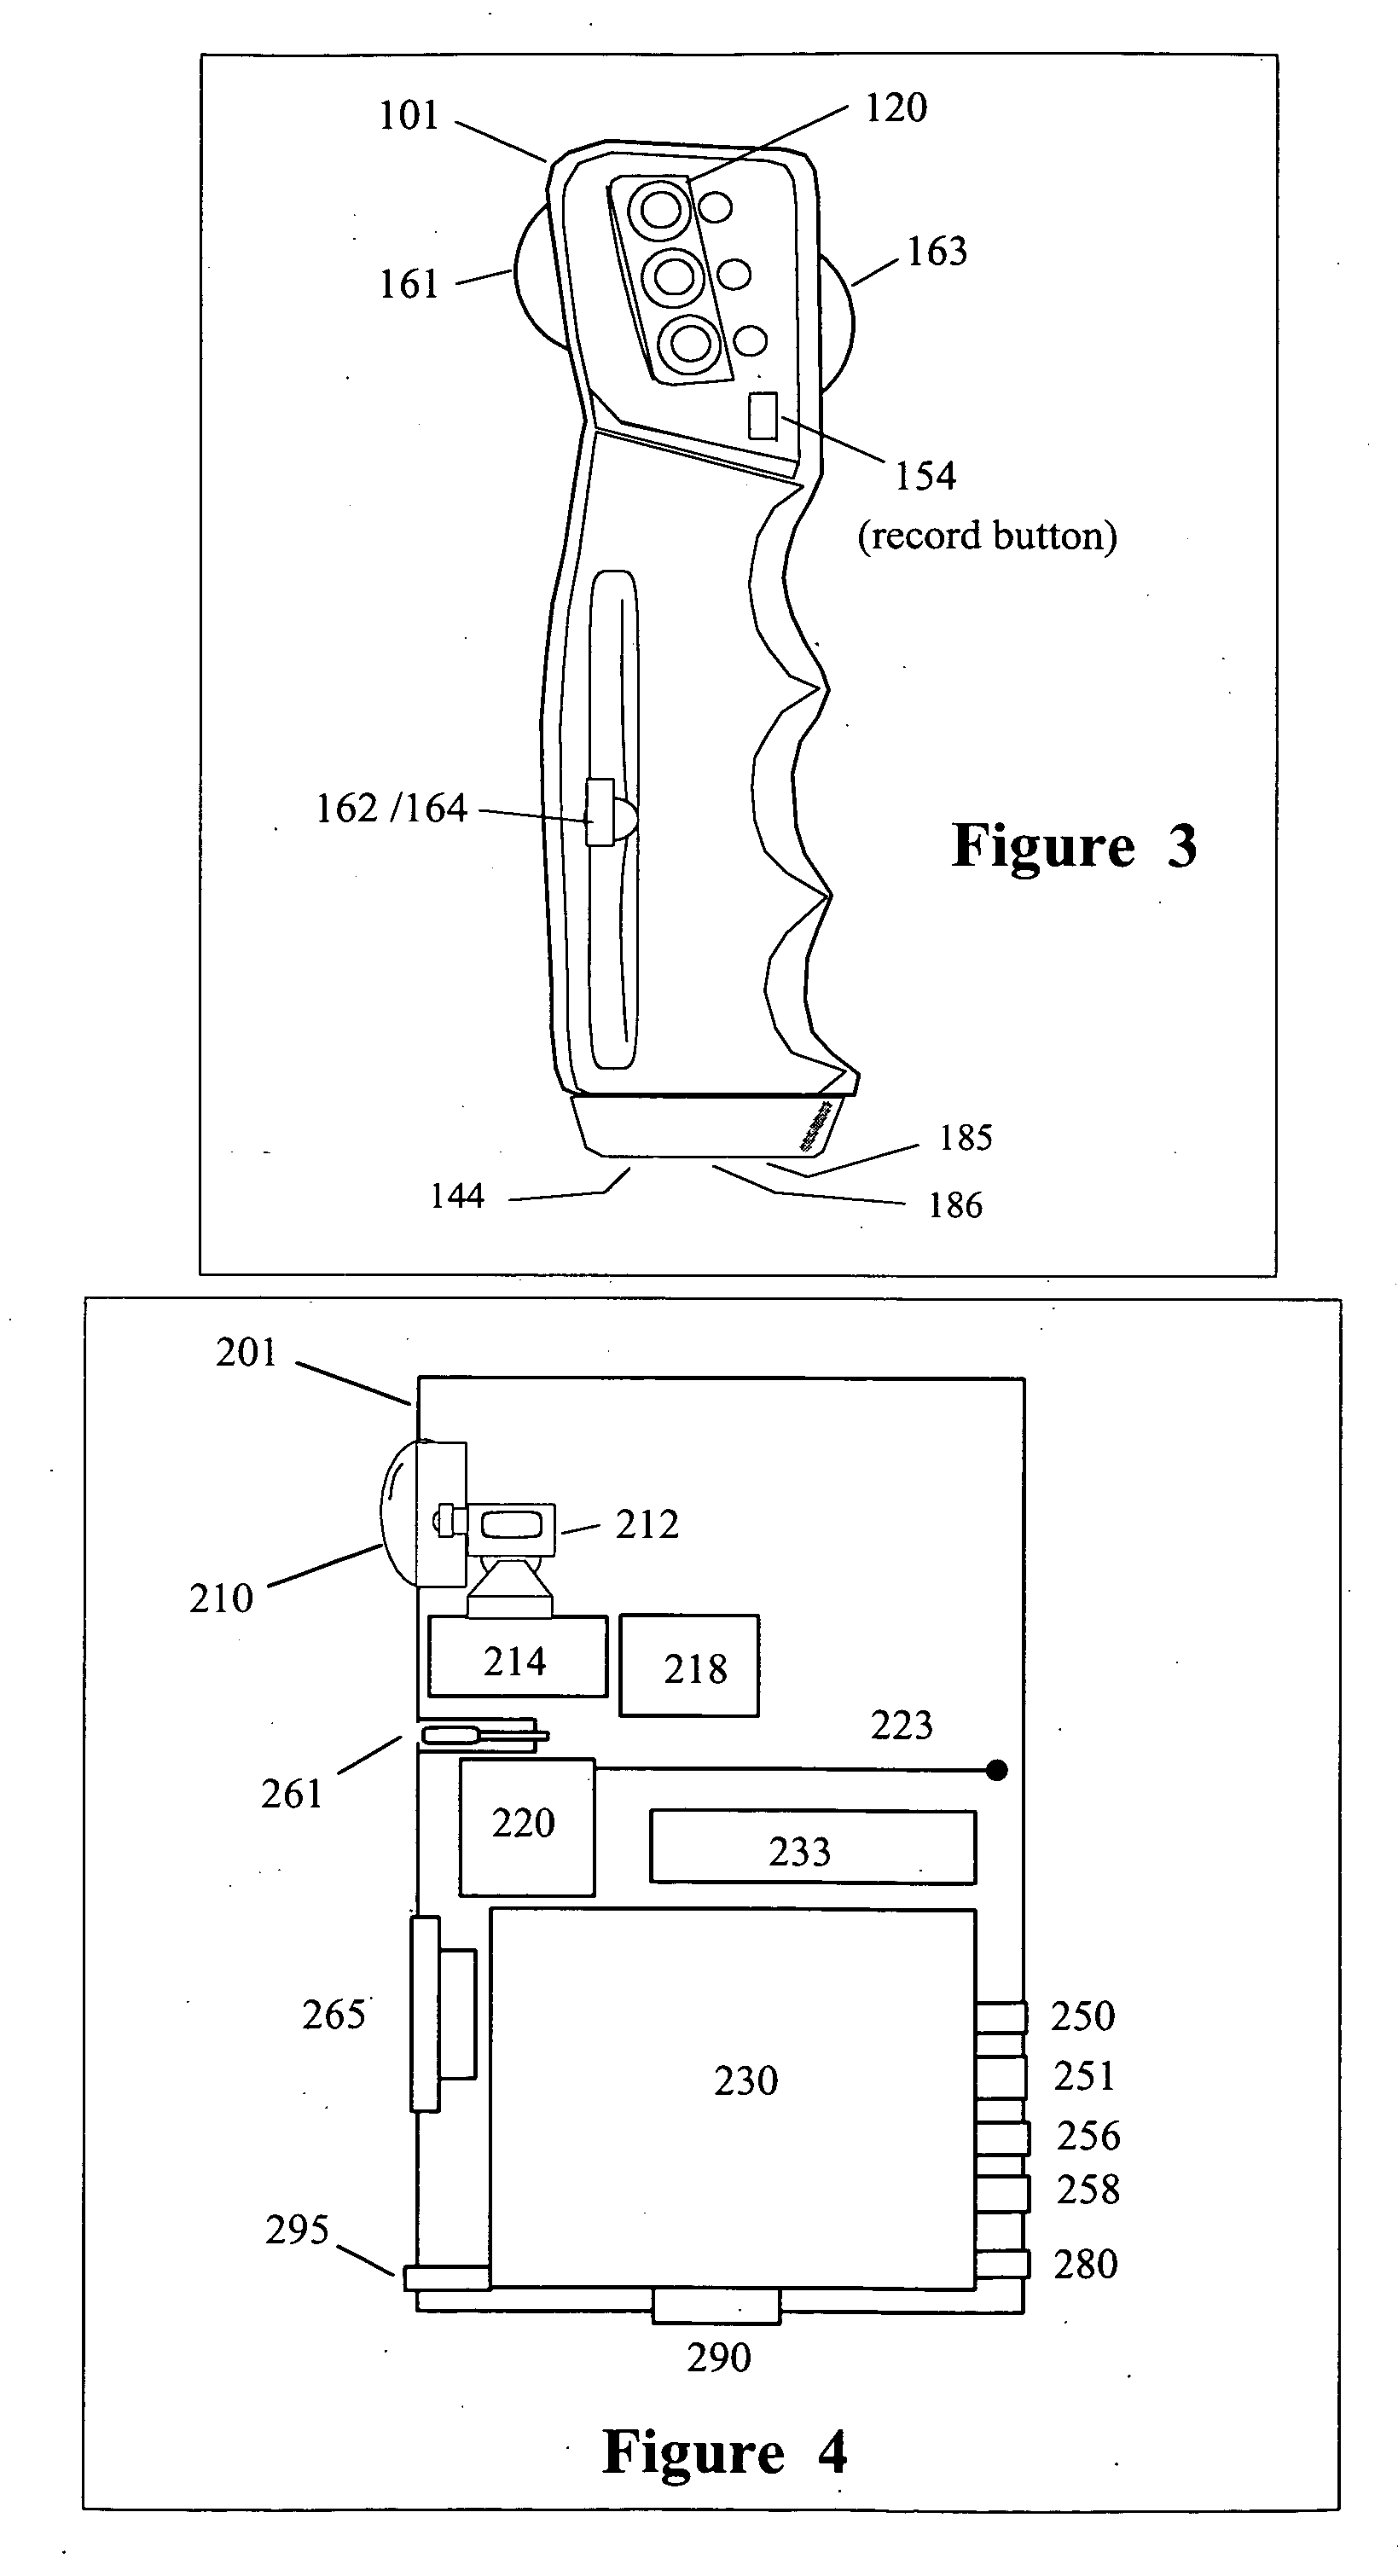 Electronic variable stroke devices and system for remote control and interactive play